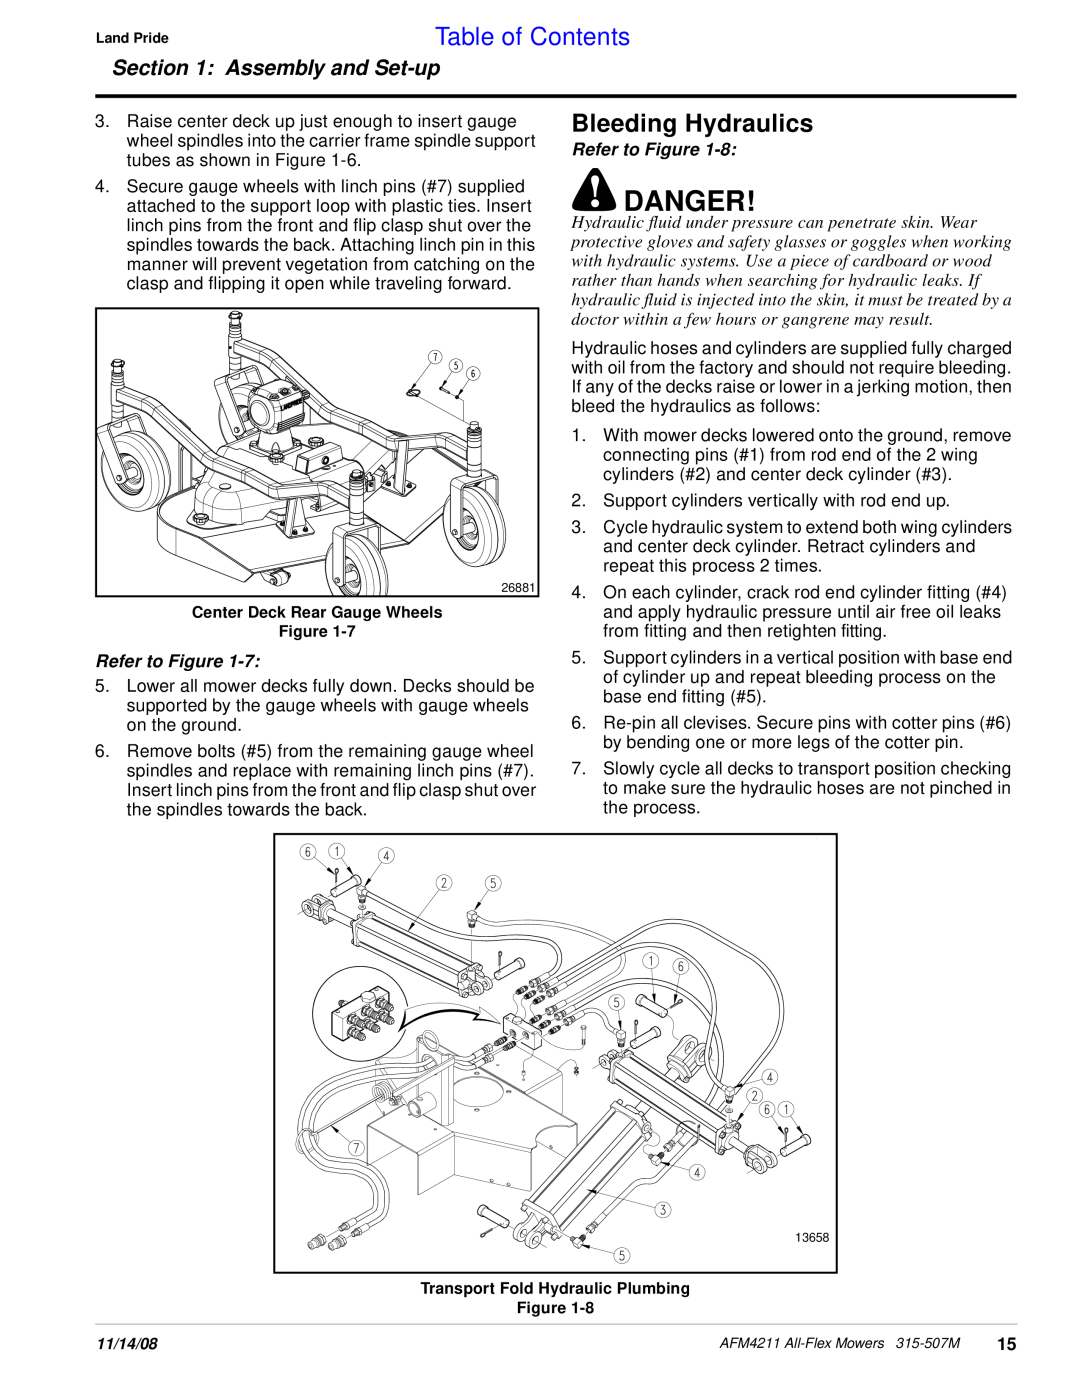 Land Pride AFM4211 manual Bleeding Hydraulics, Danger, Land PrideTable of Contents, Assembly and Set-up, Refer to Figure 